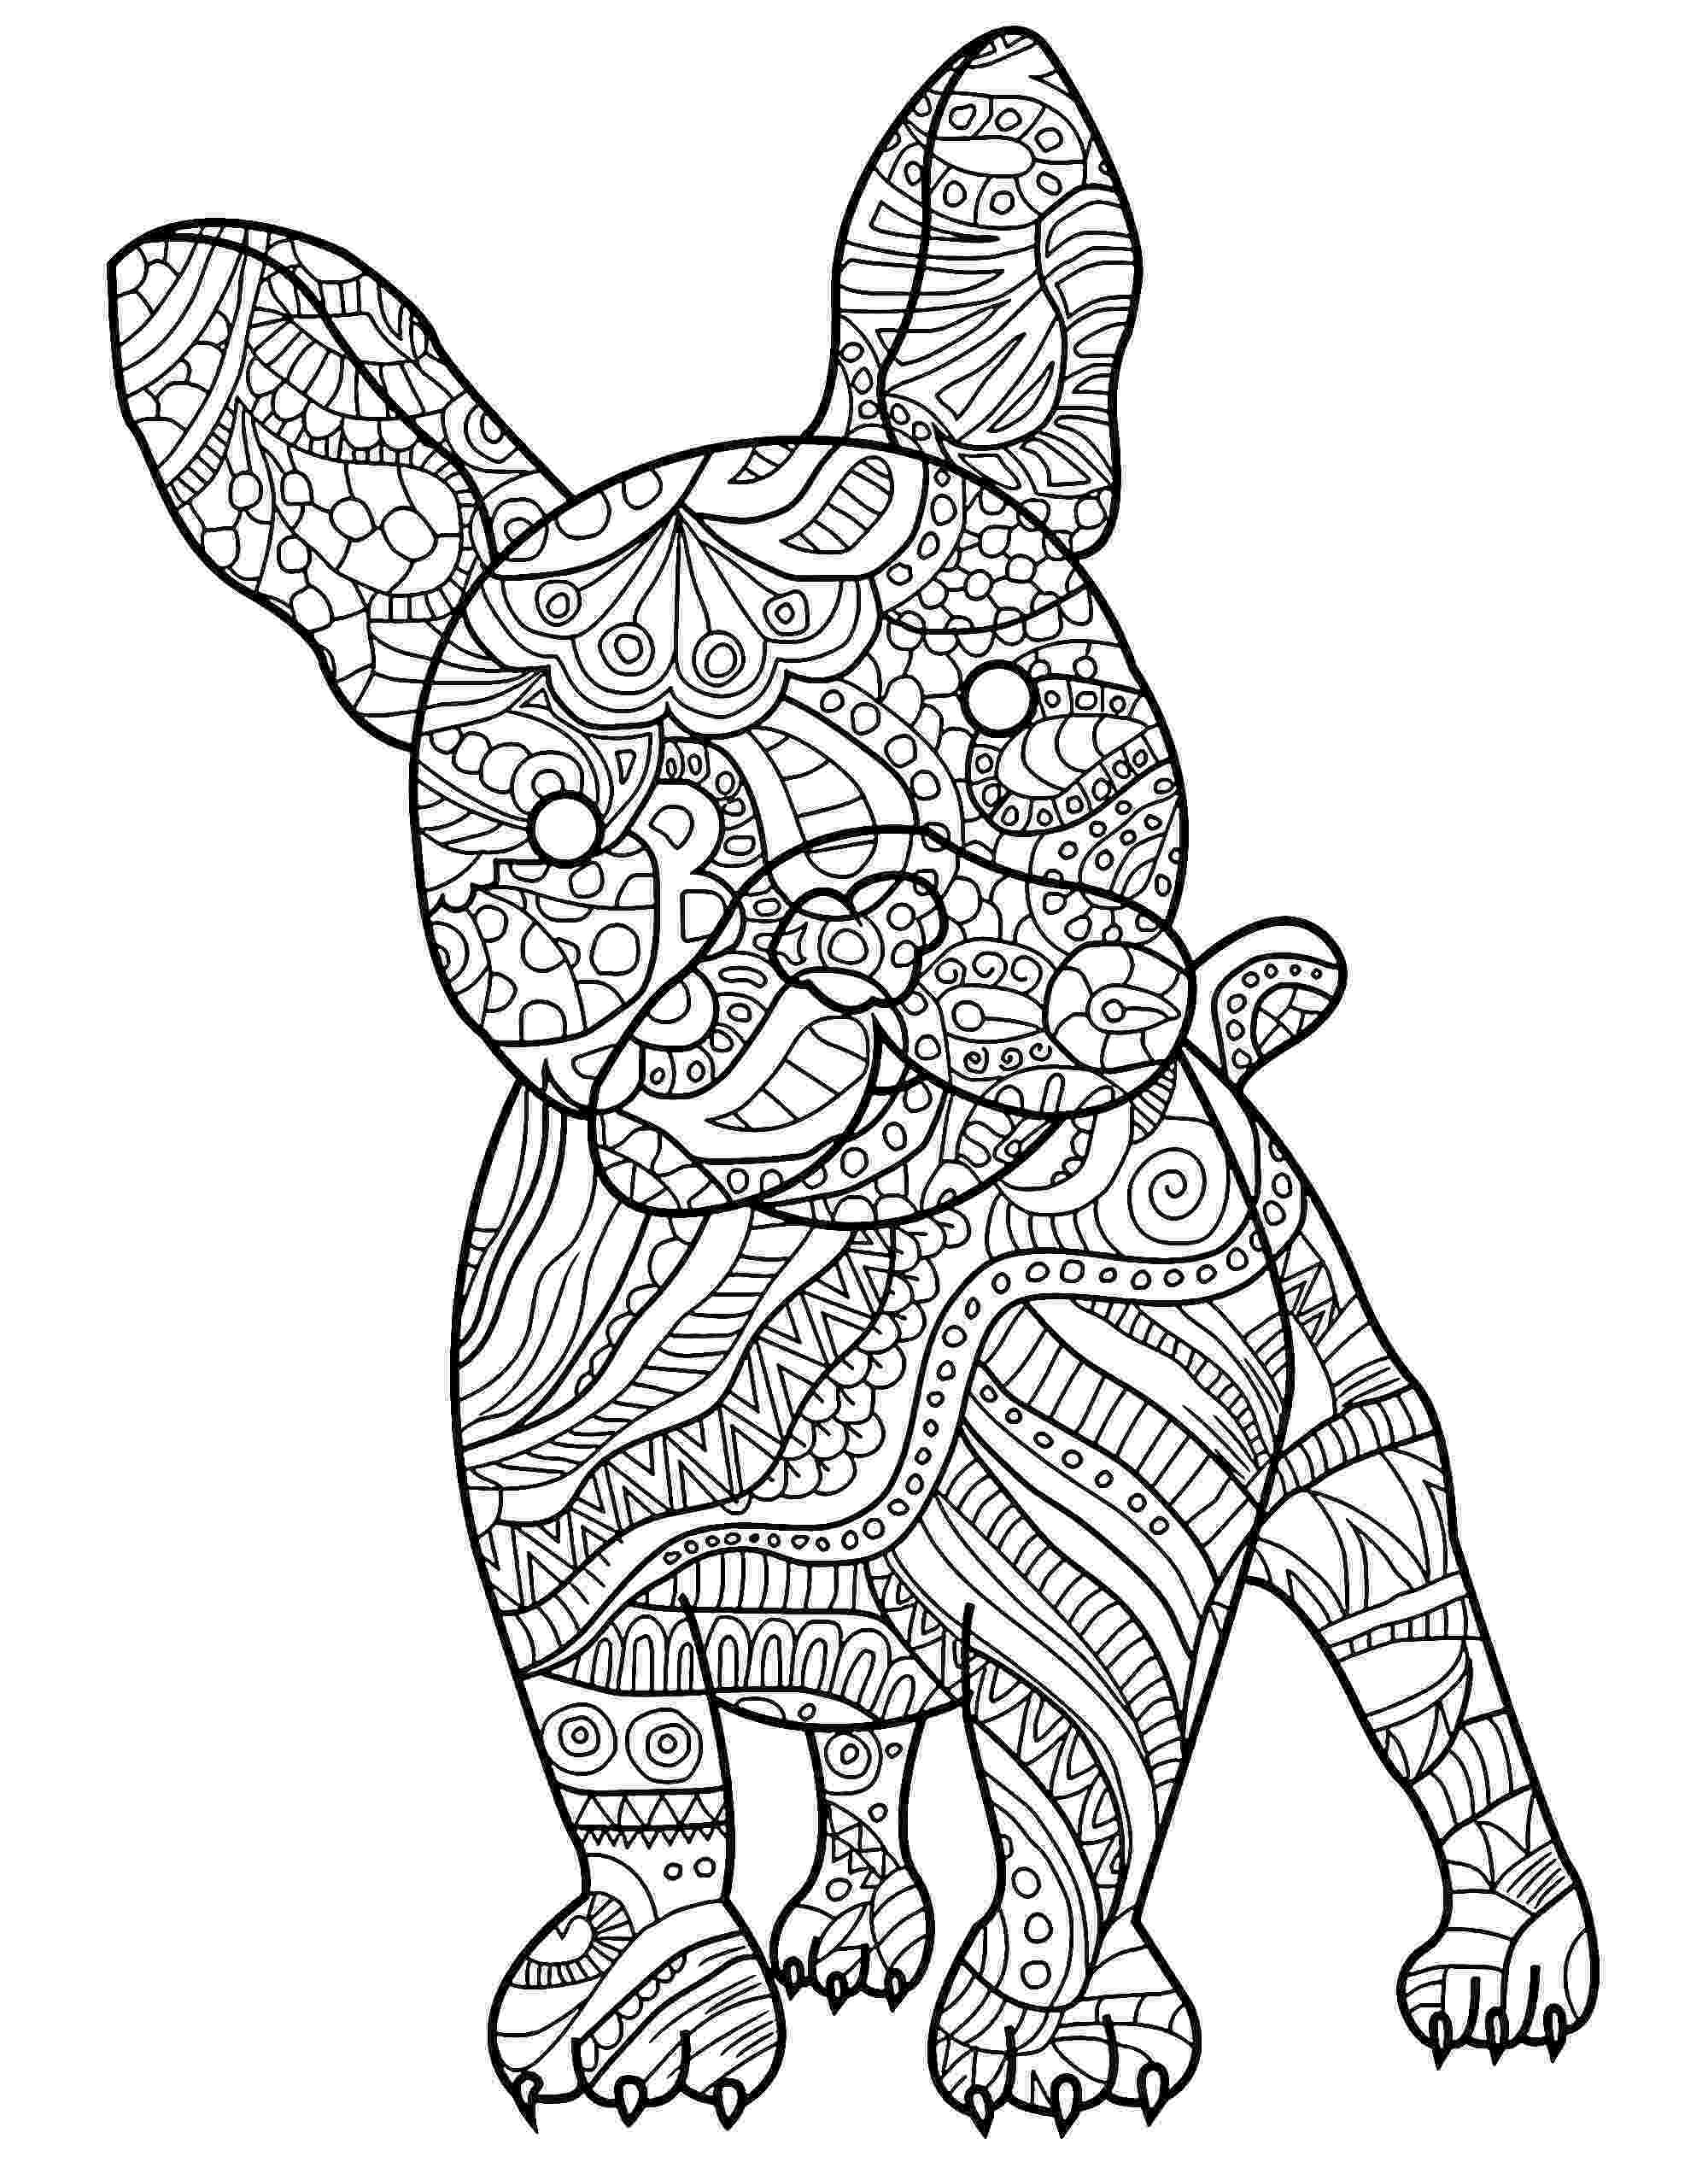 dogs coloring page dogs to download for free dogs kids coloring pages page dogs coloring 